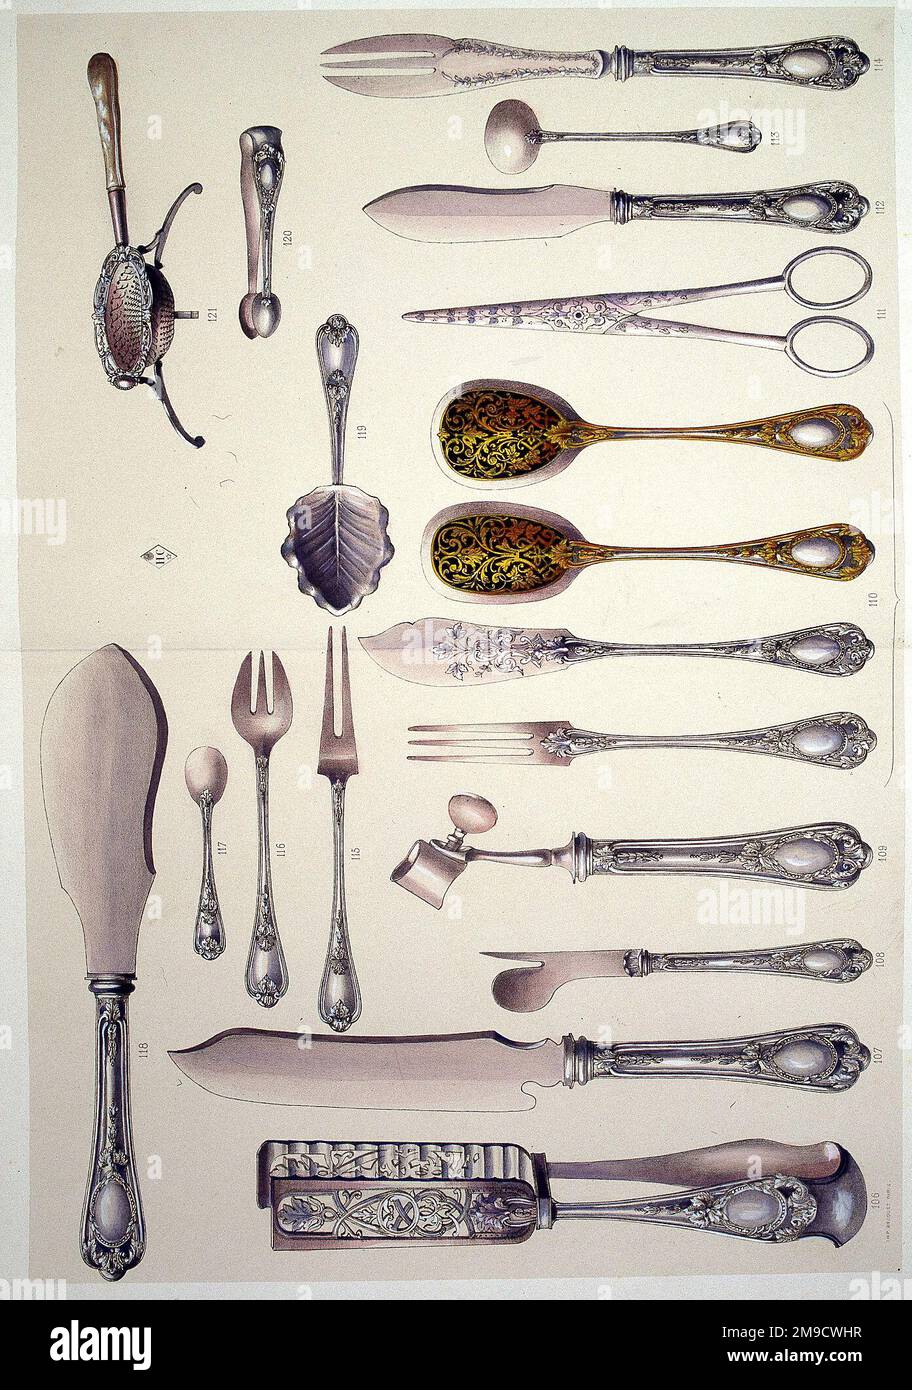 19th century French Cutlery Stock Photo